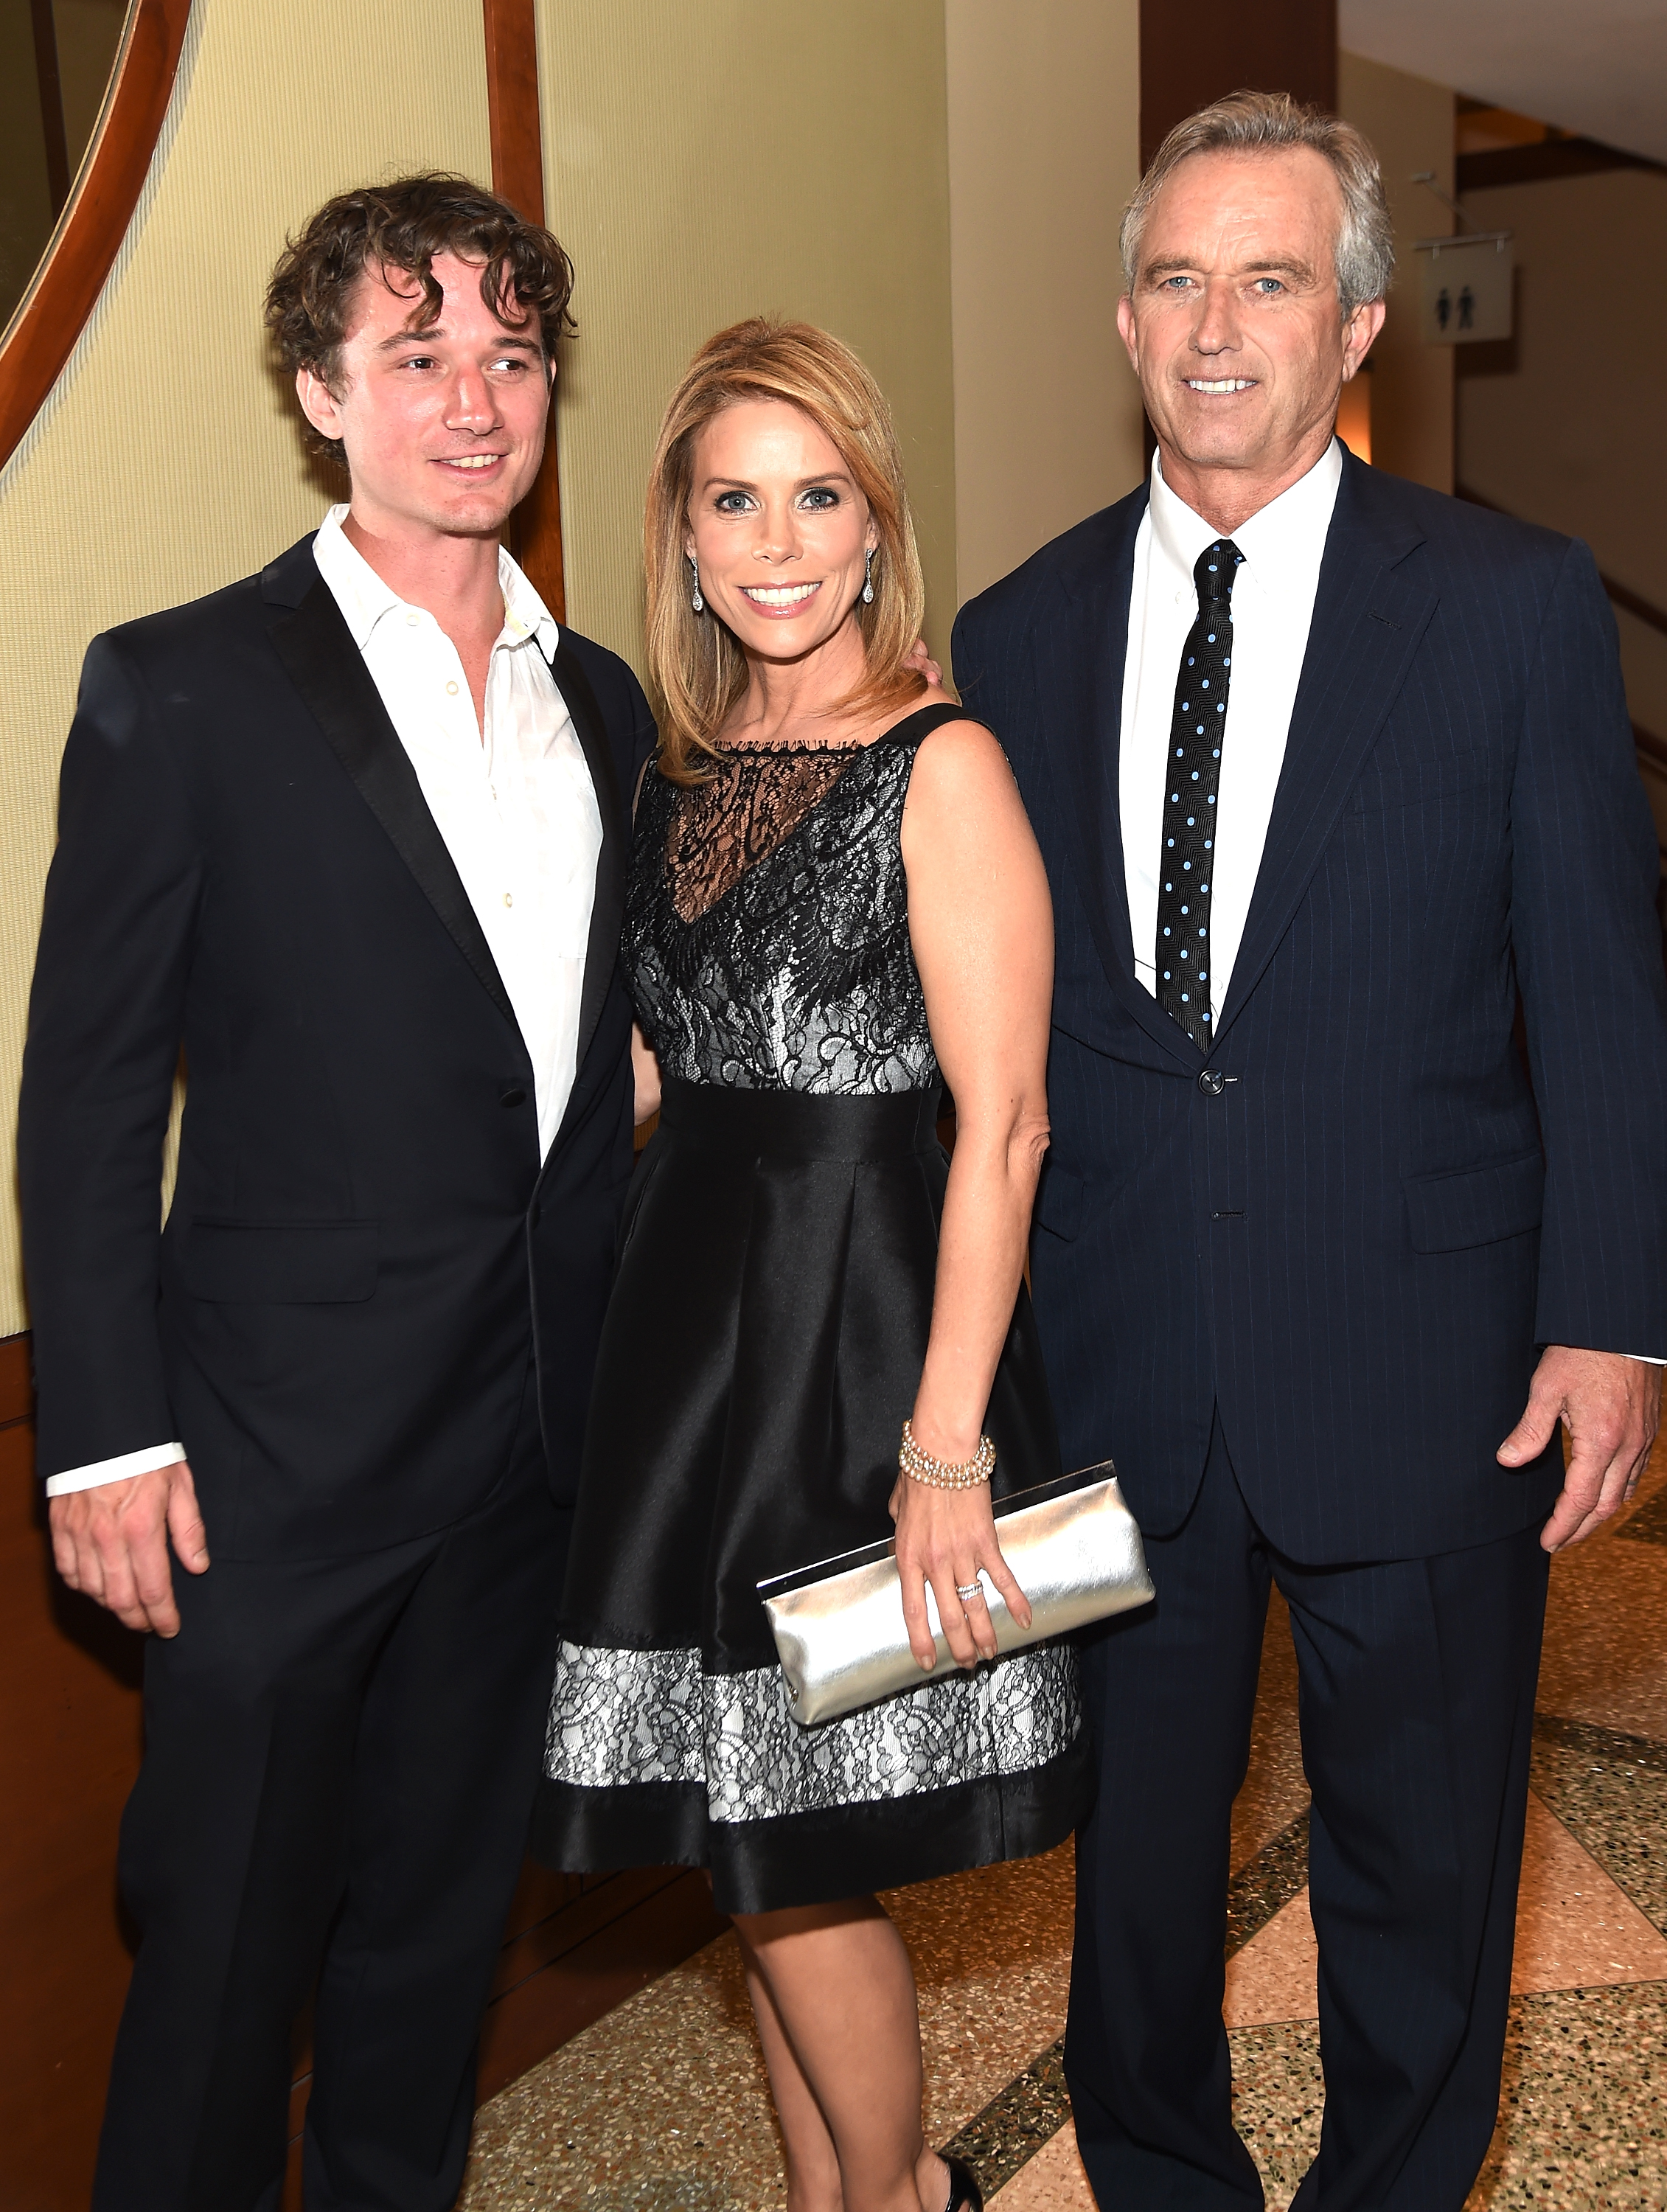 Bobby Kennedy III, Cheryl Hines and Robert Kennedy Jr attend the 2015 Riverkeeper Fishermen's Ball at Pier Sixty at Chelsea Piers, on May 20, 2015, in New York City. | Source: Getty Images